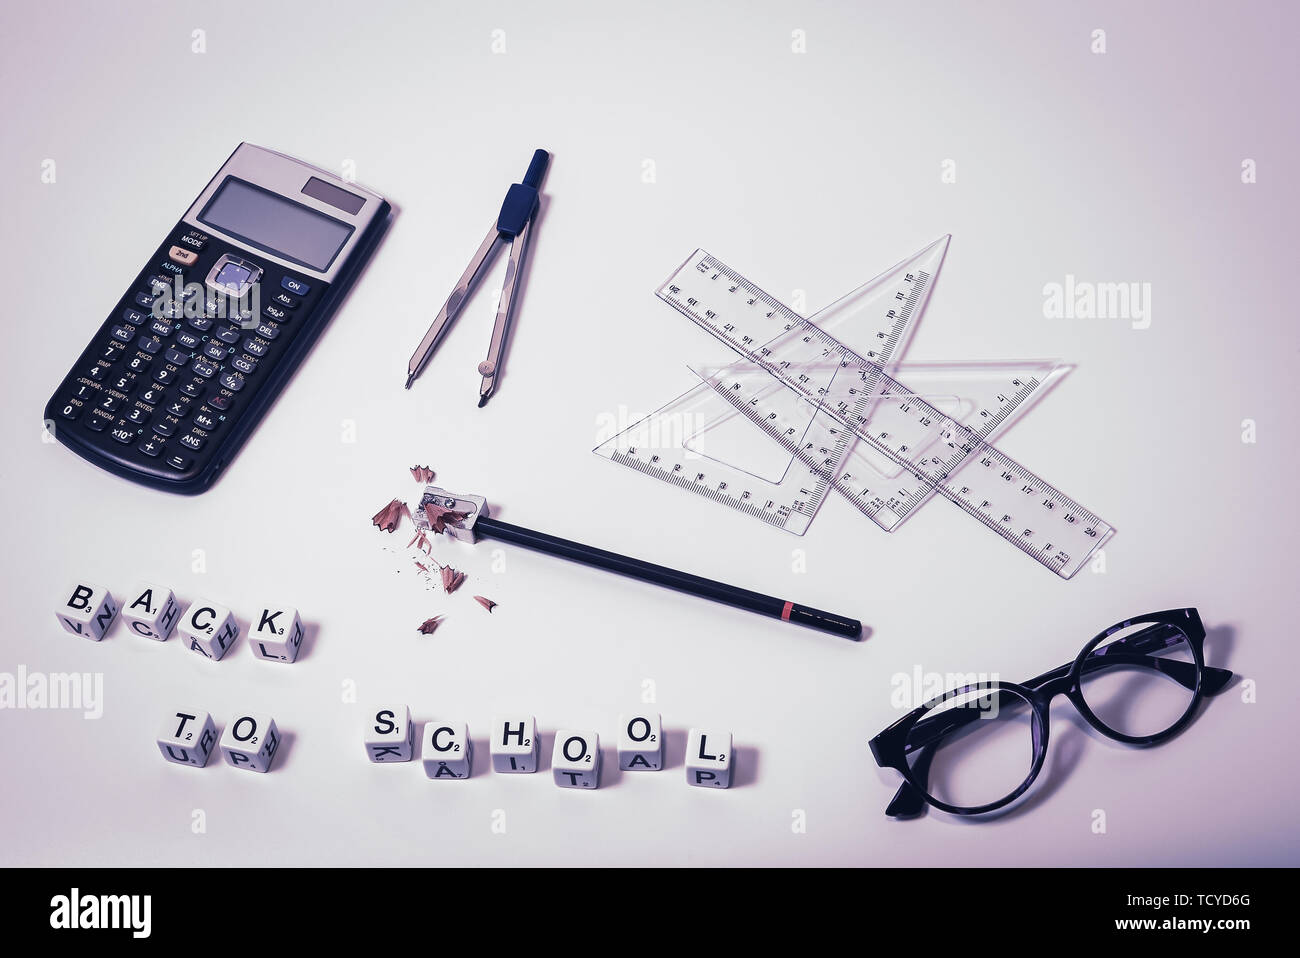 Top view of school supplies on white background with scrabble letters in the words back to school - Concept of college student, university education Stock Photo